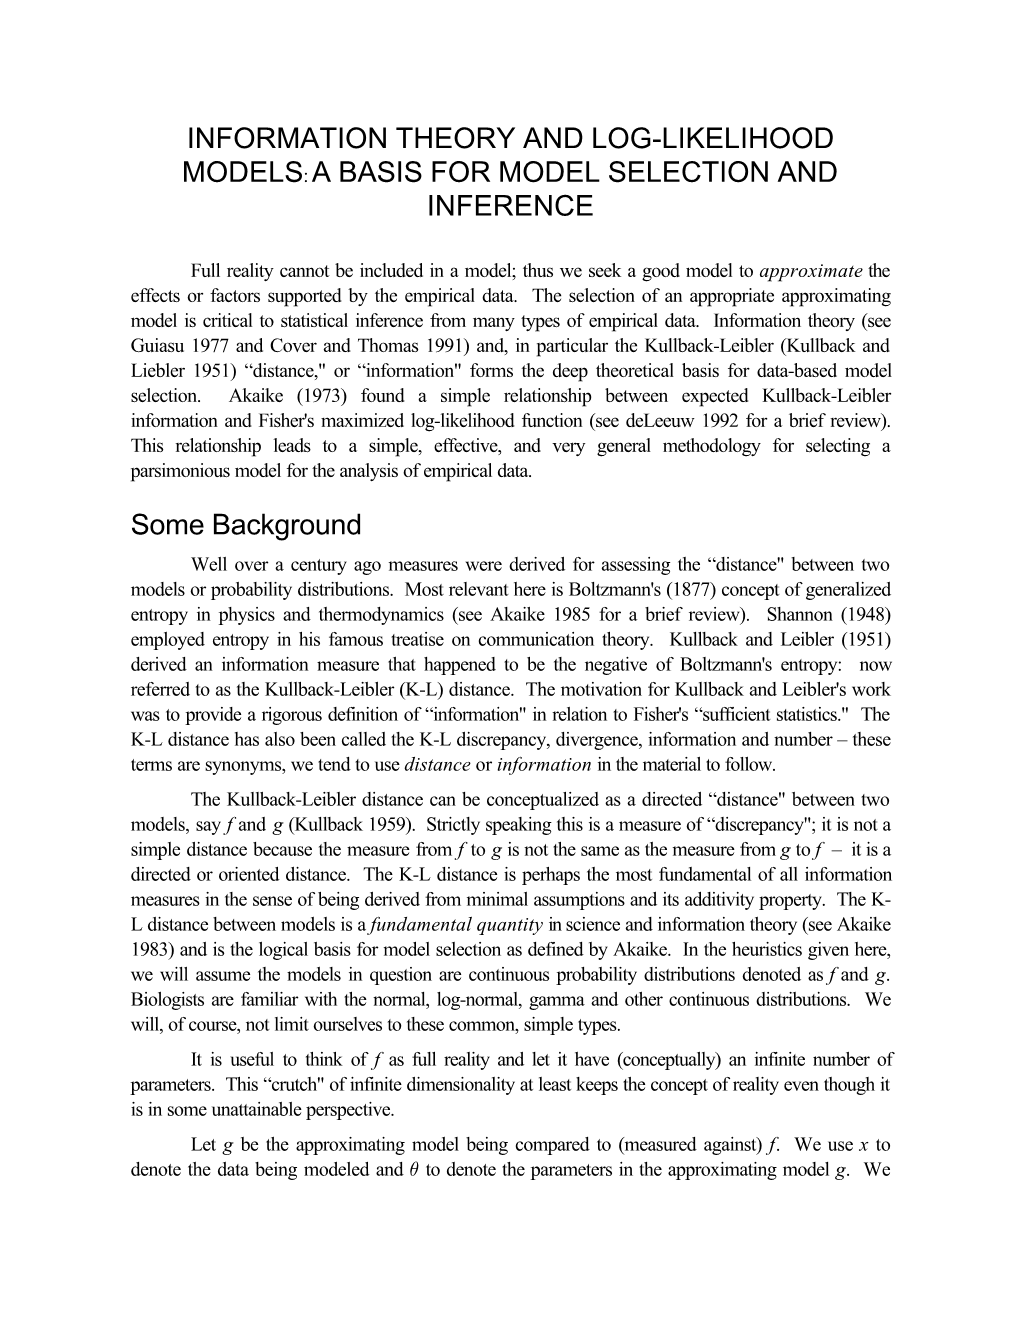 Model Selection and Inference